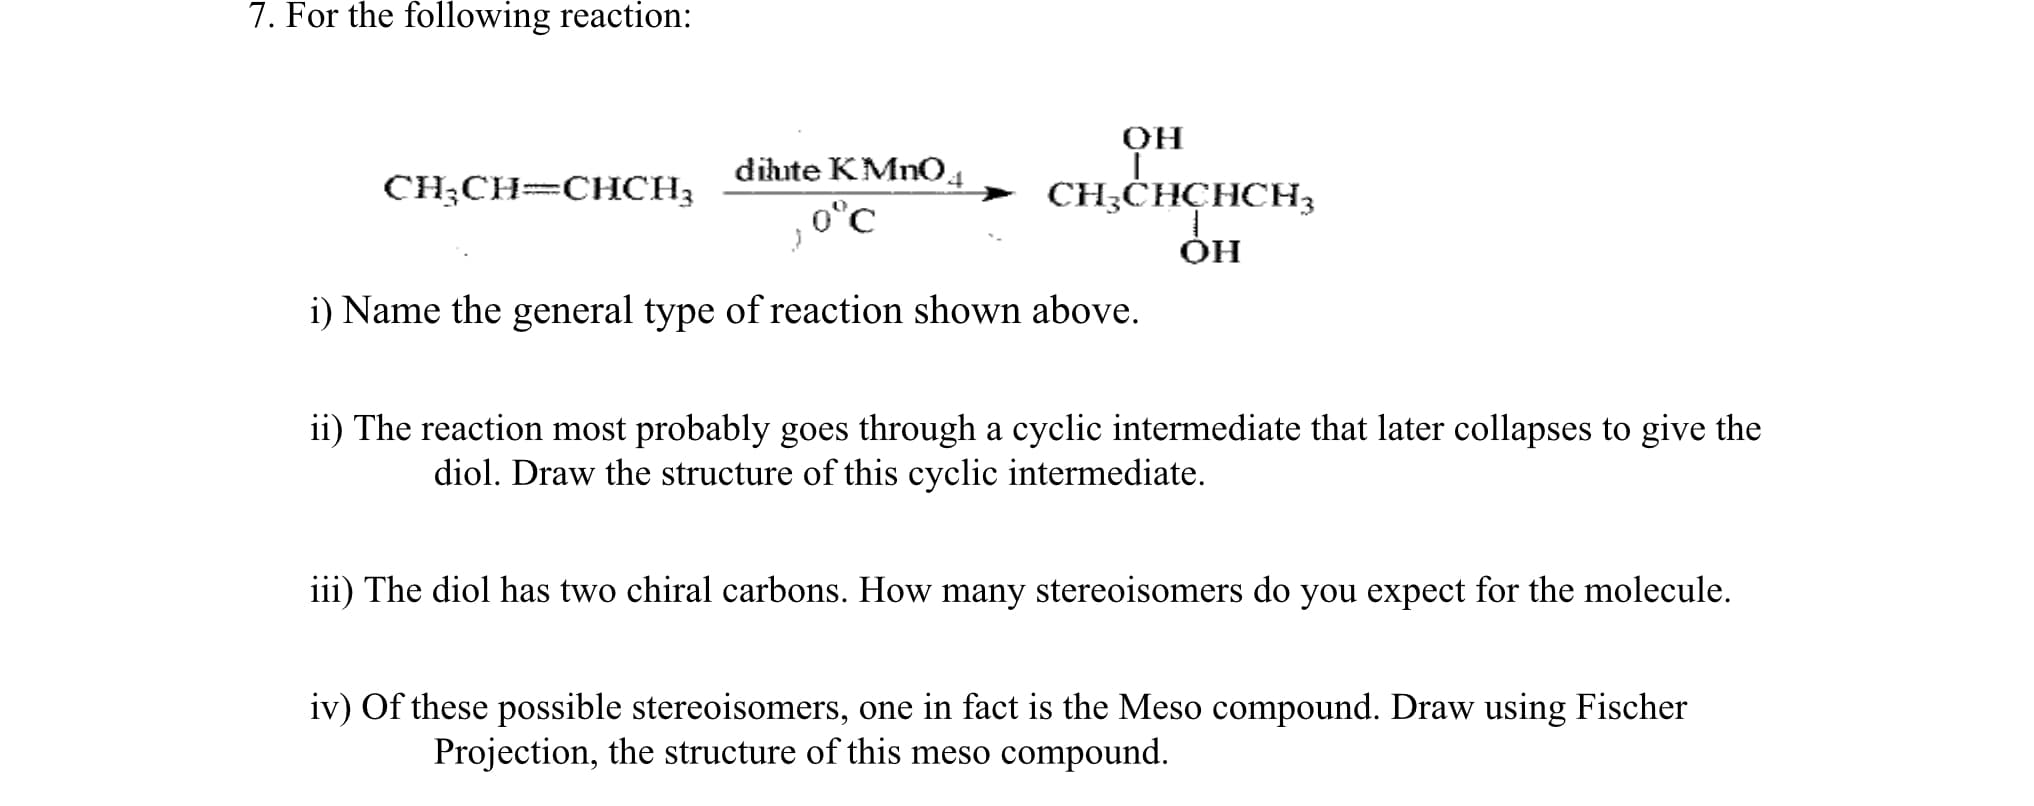 dihute KMnO4
CH;CH=CHCH3
> CH;CHCHCH3
0°C
i) Name the general type of reaction shown above.
ii) The reaction most probably goes through a cyclic intermediate that later collapses to give the
diol. Draw the structure of this cyclic intermediate.
iii) The diol has two chiral carbons. How many stereoisomers do you expect for the molecule.
